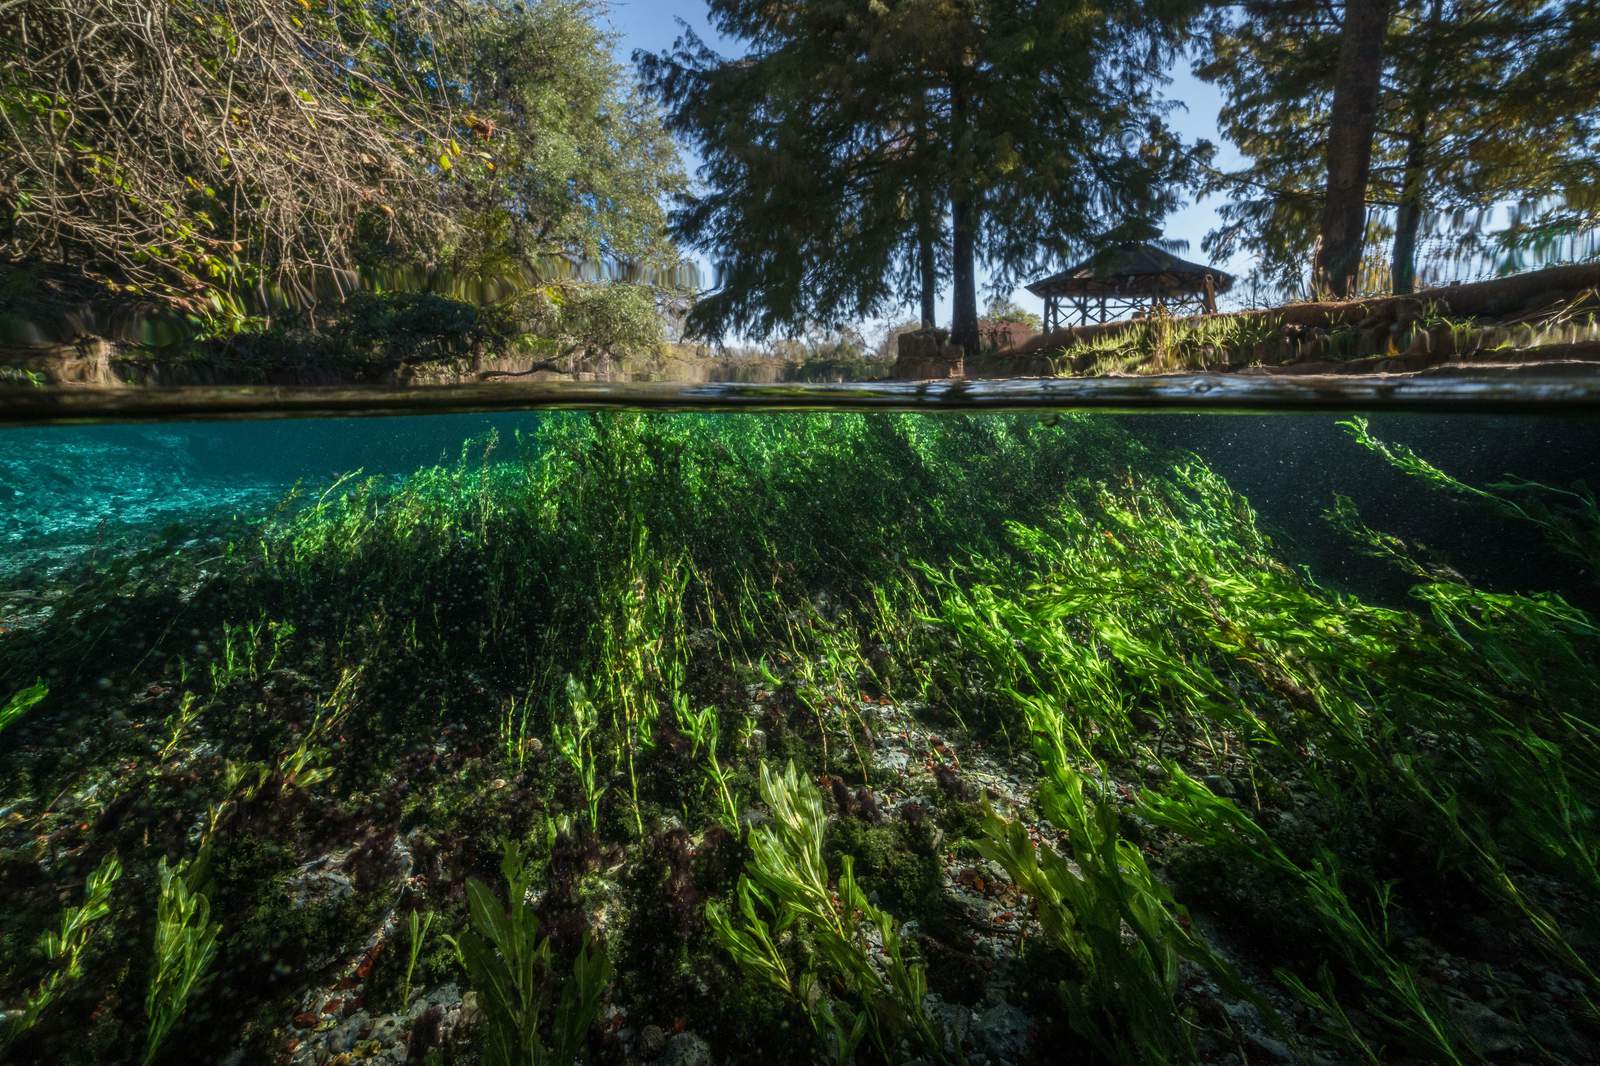 New nature project could bring 100-mile hiking trail connecting San Antonio and Austin